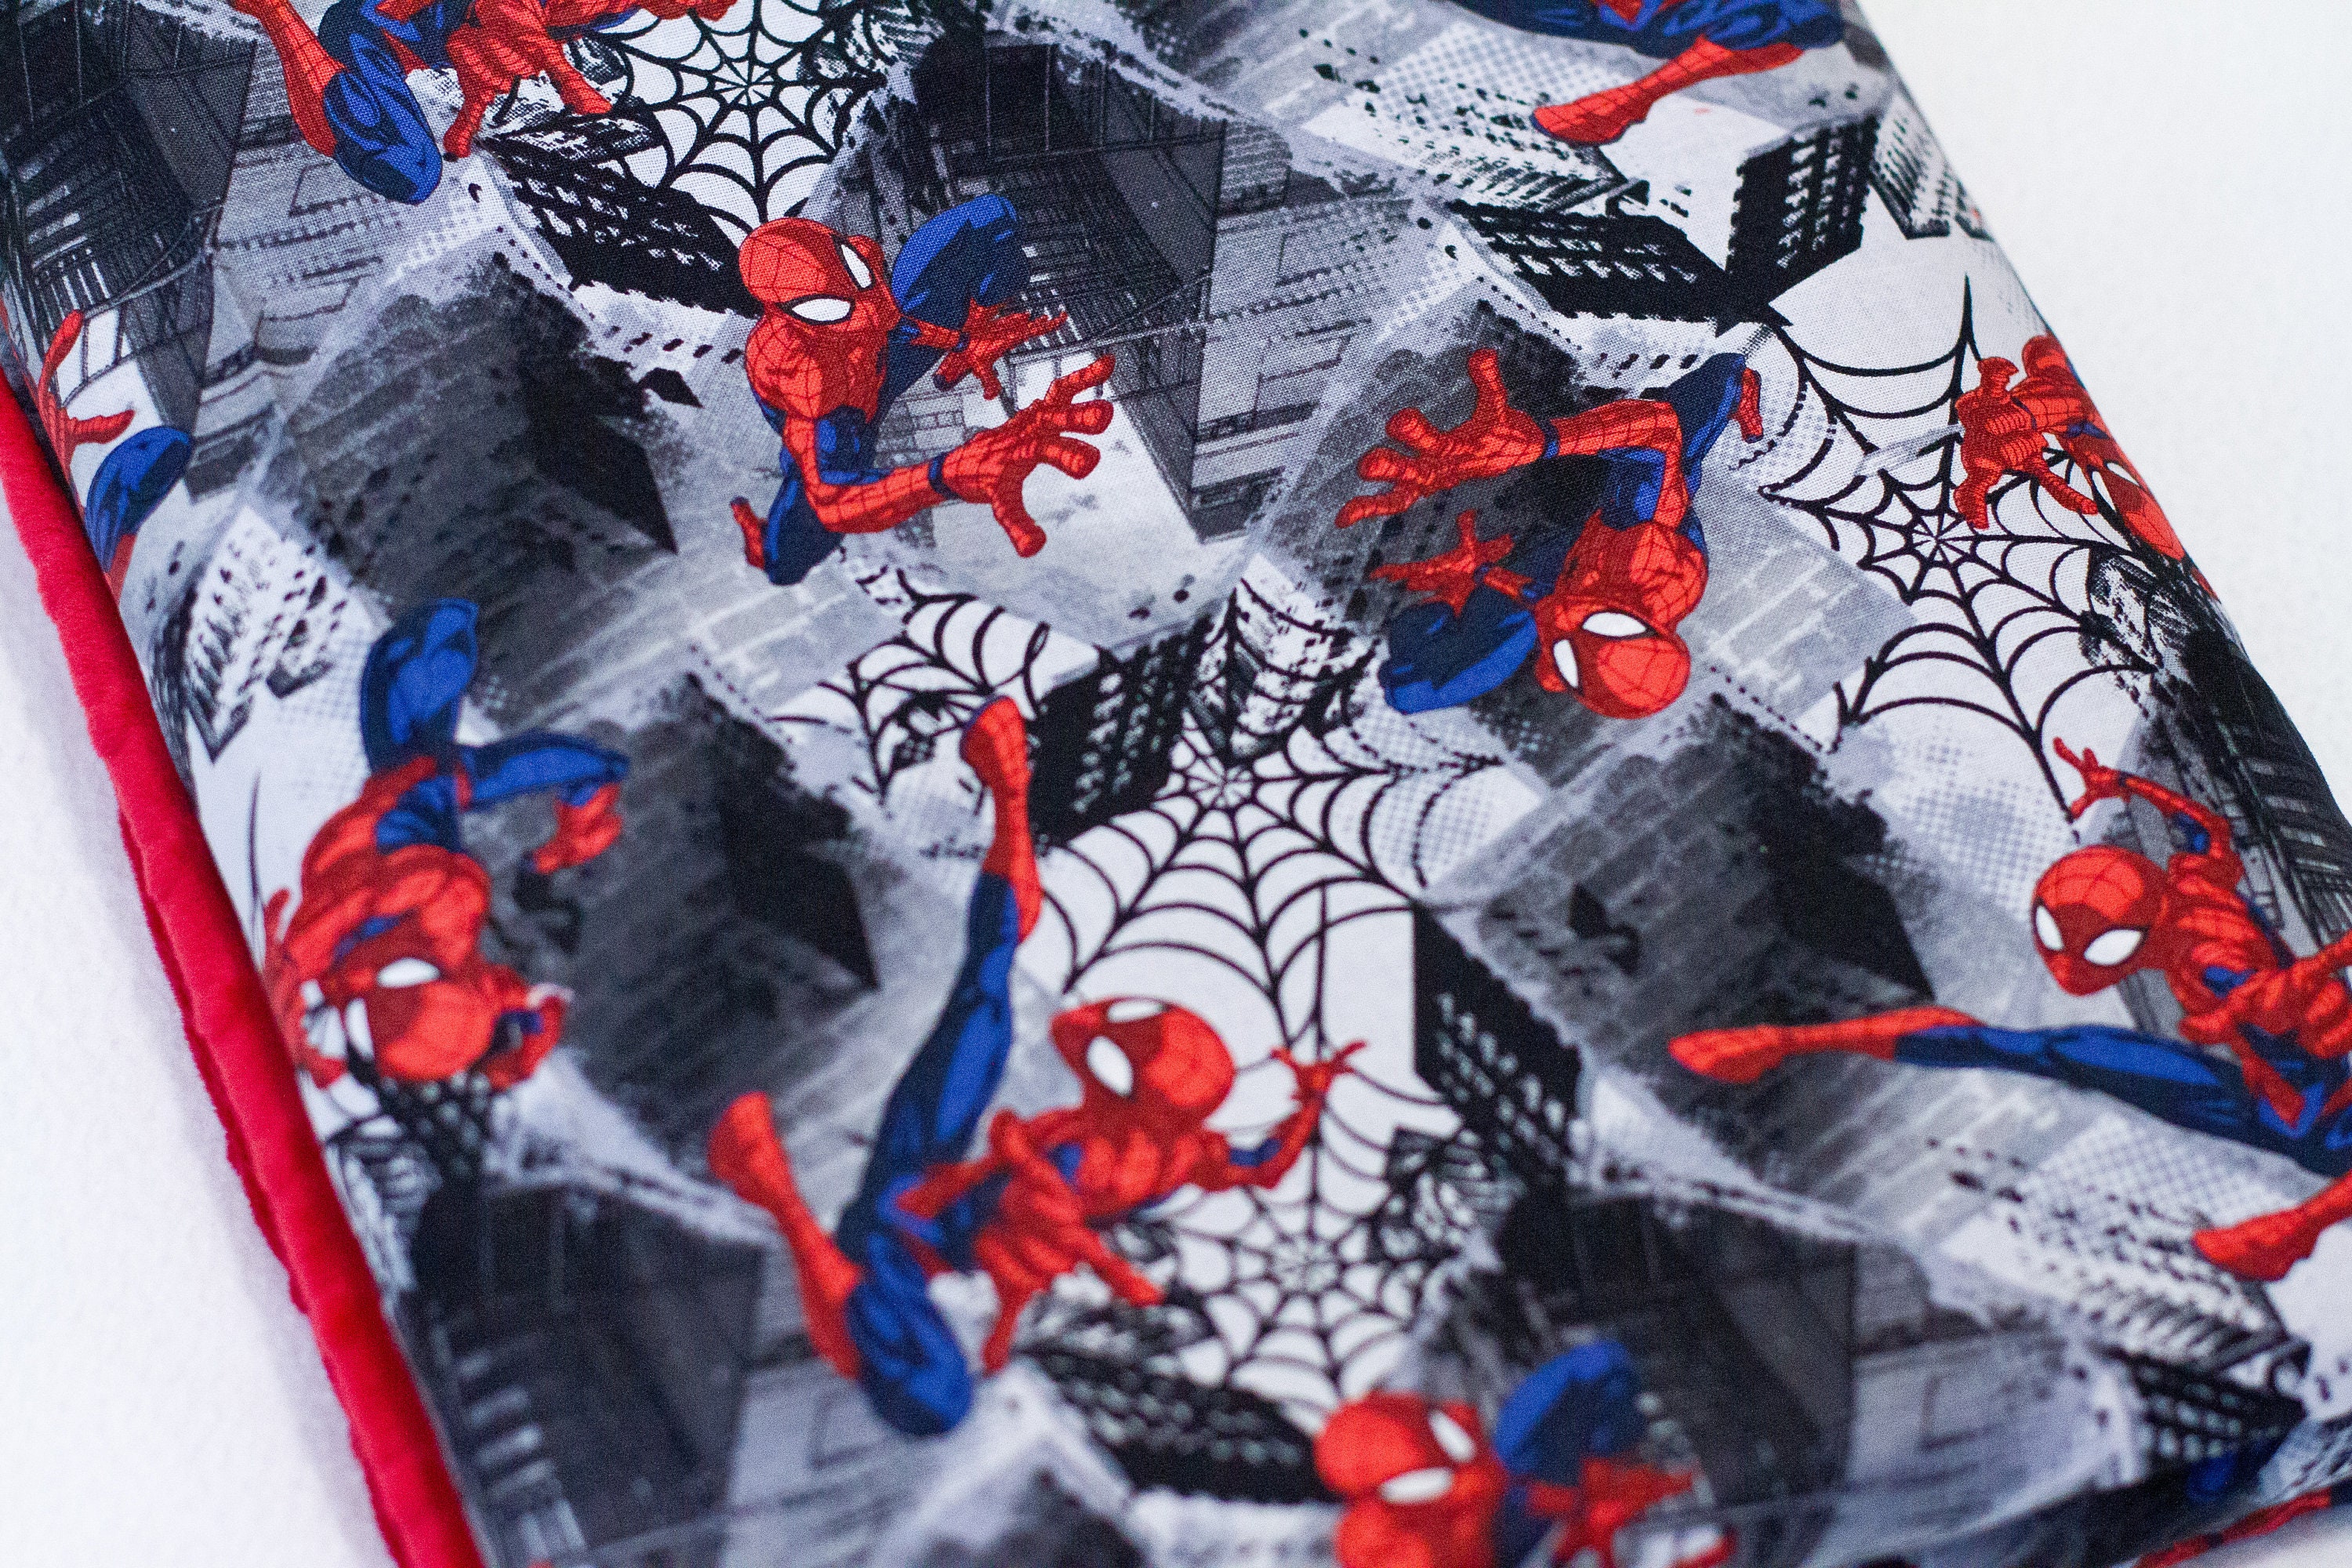 Boys Spiderman Weighted Blanket - Boys or Girls Spiderman Weighted